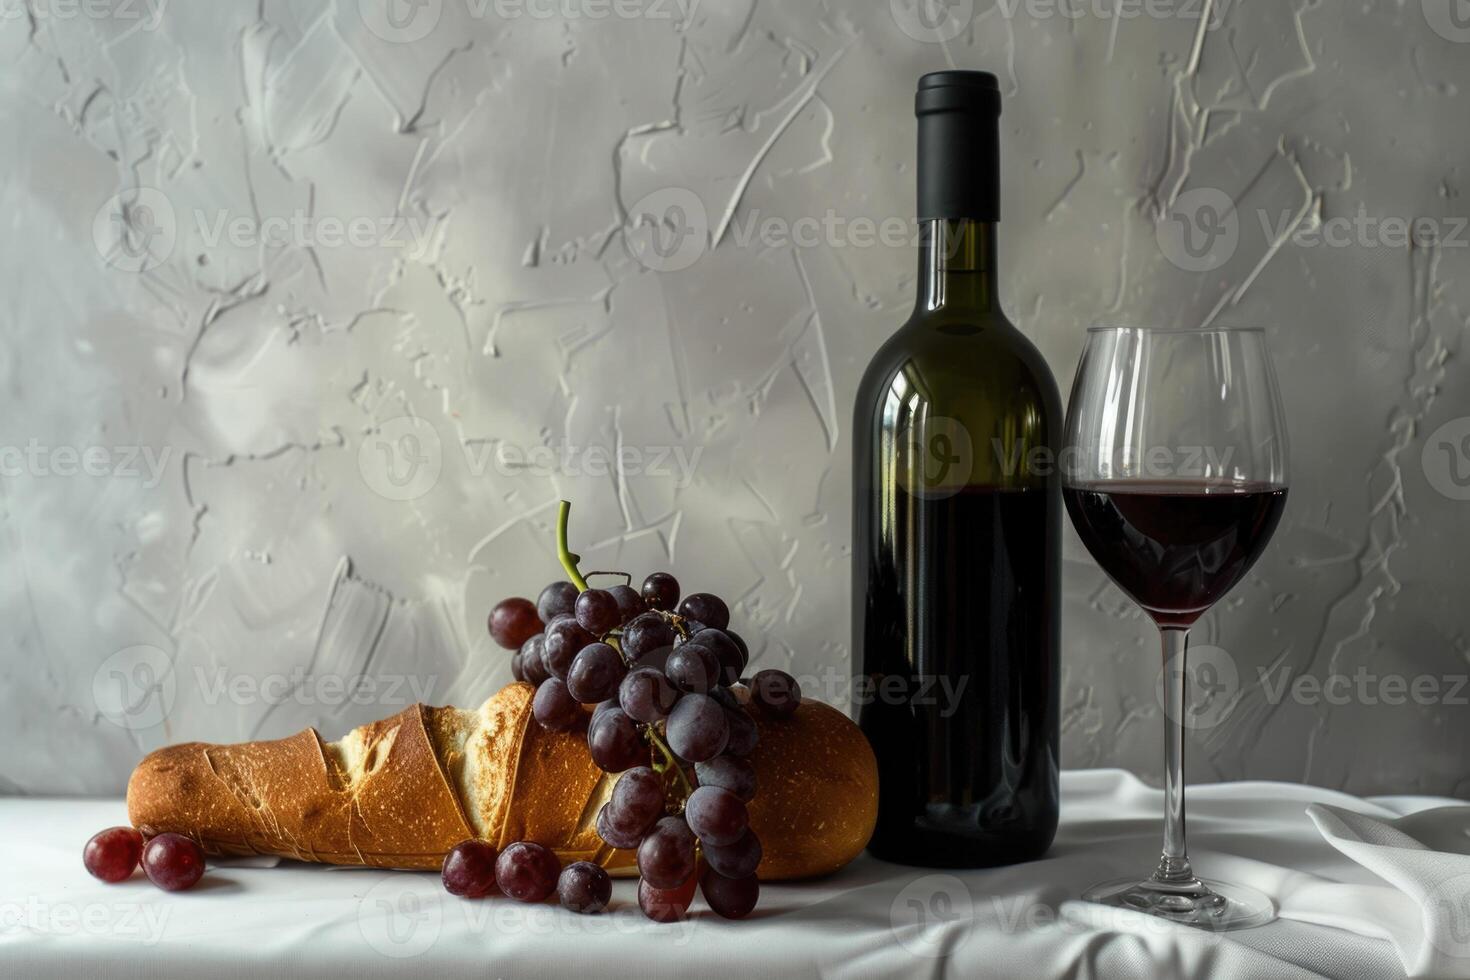 Wine bottle and wine glass still life with grapes and bread on white plaster background. Wine photo